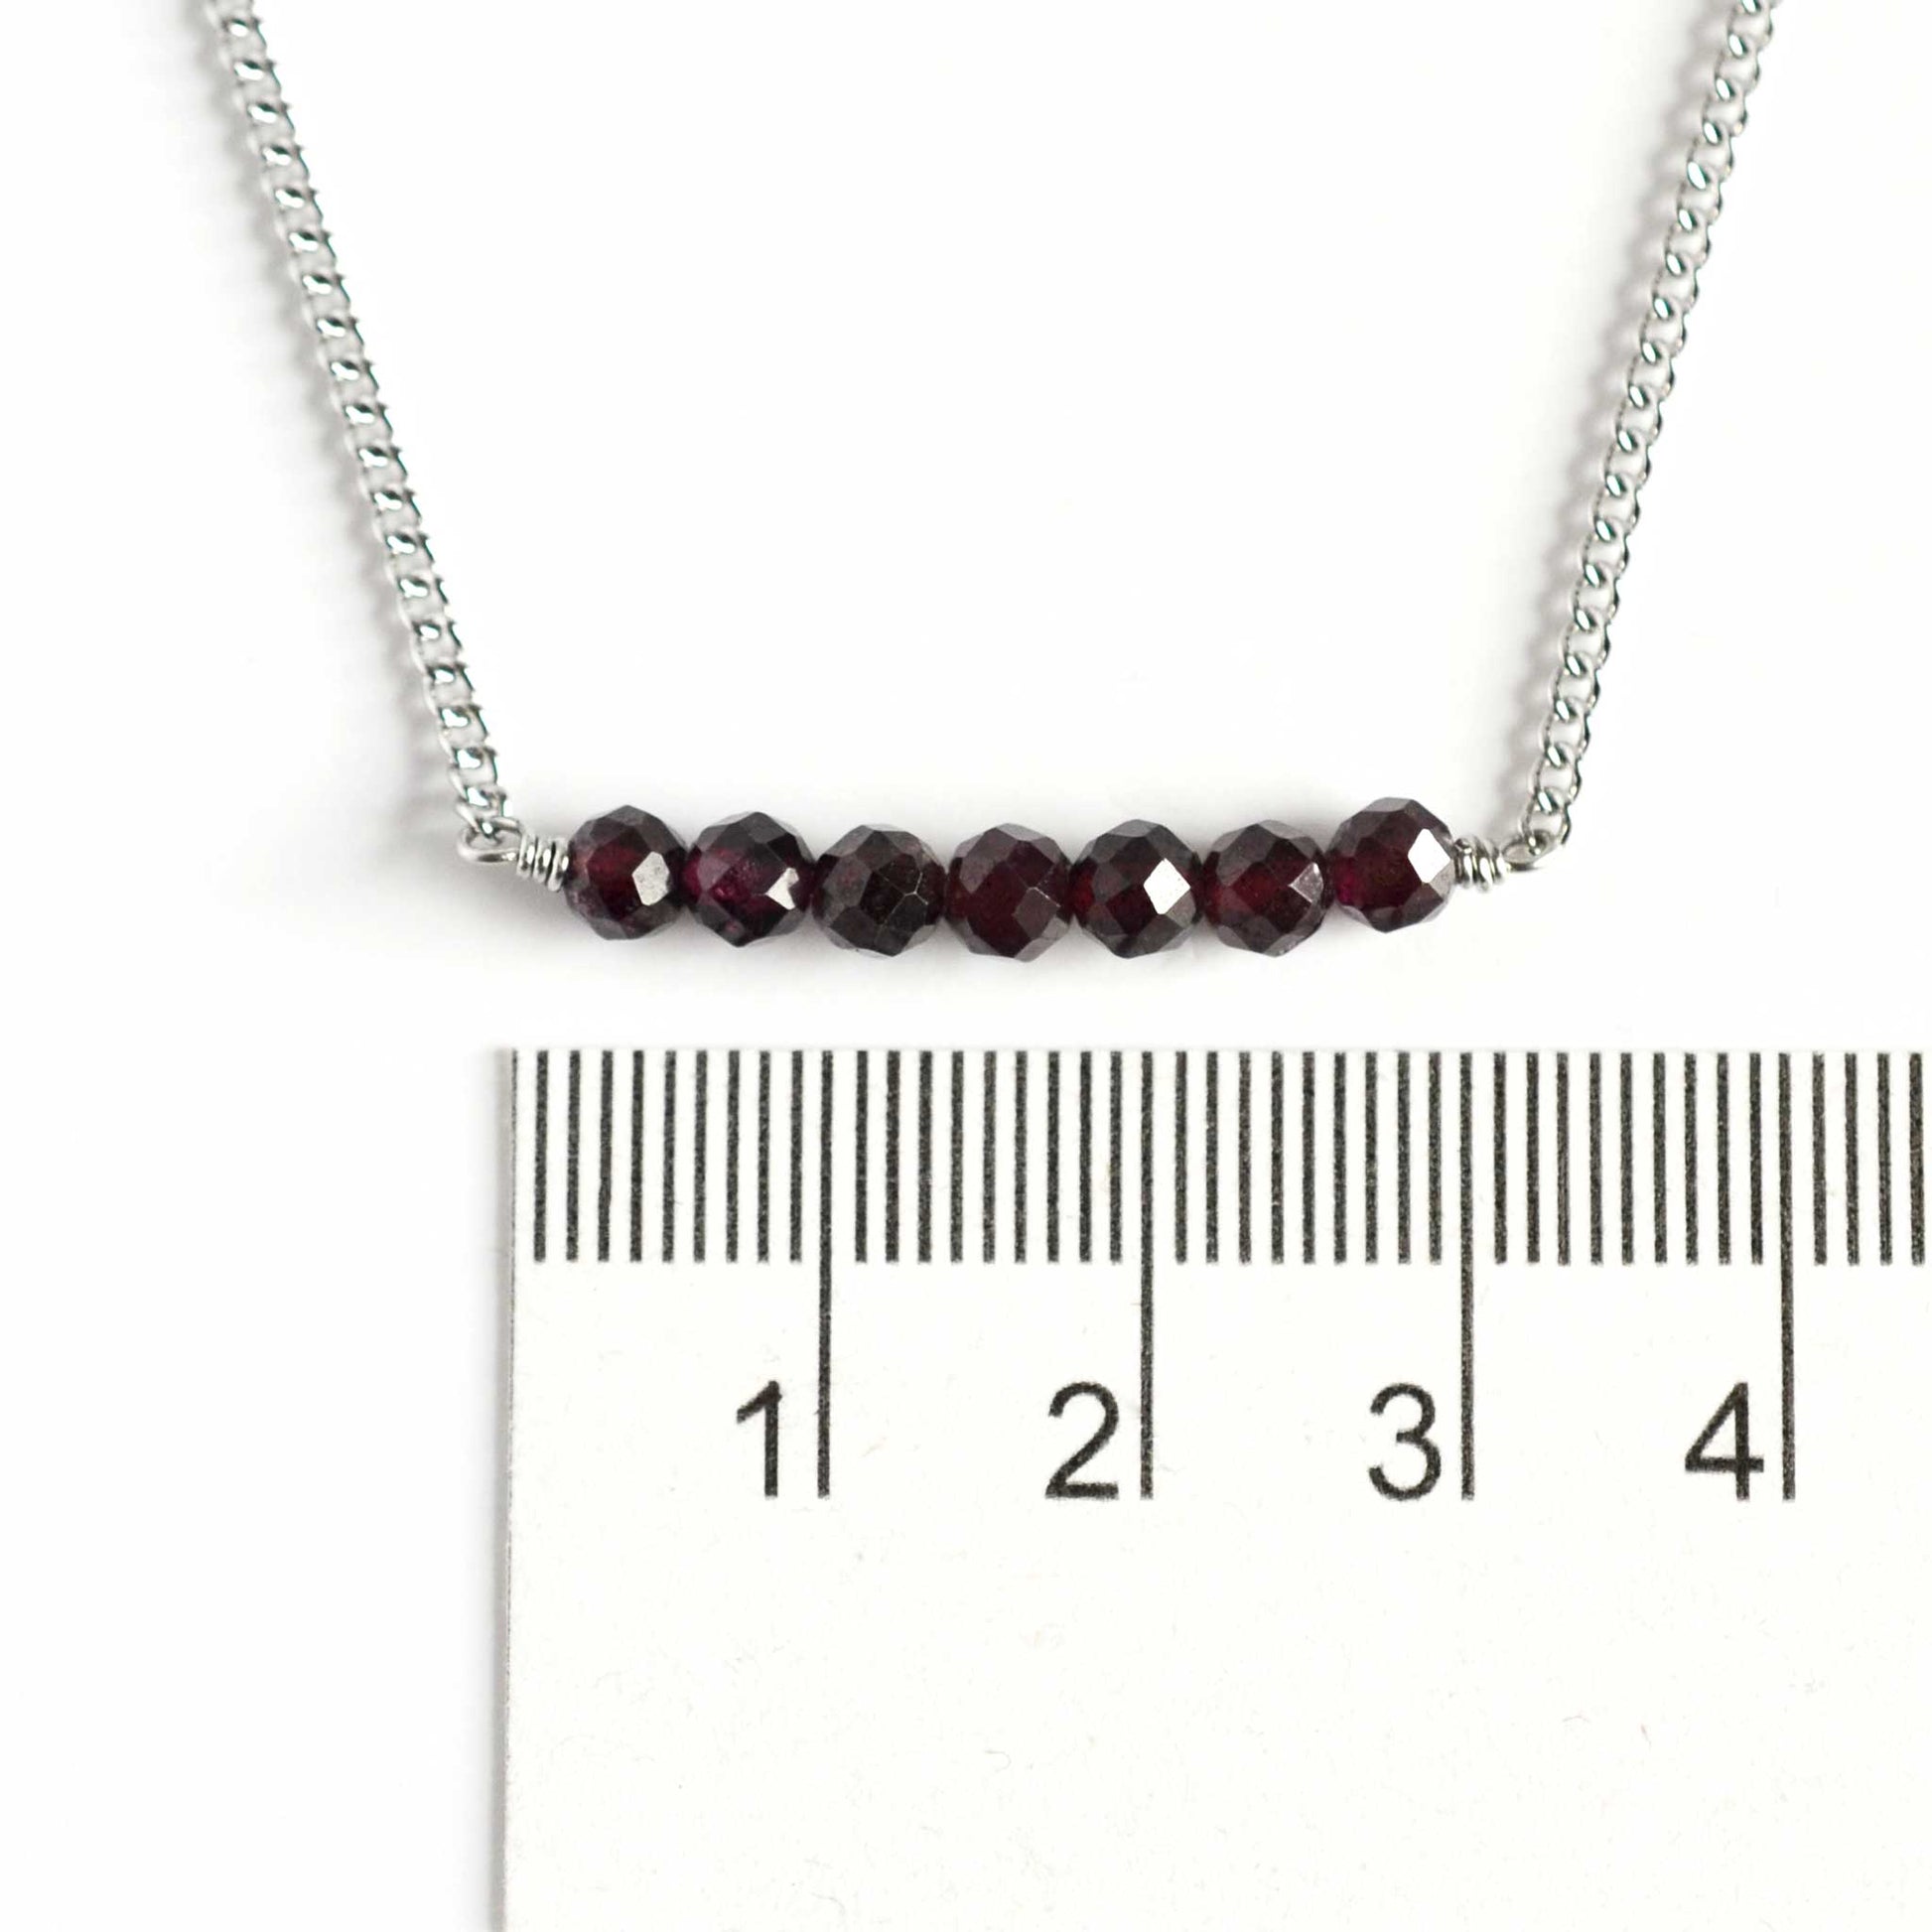 Dainty Garnet crystal necklace with 4mm gemstone beads next to ruler